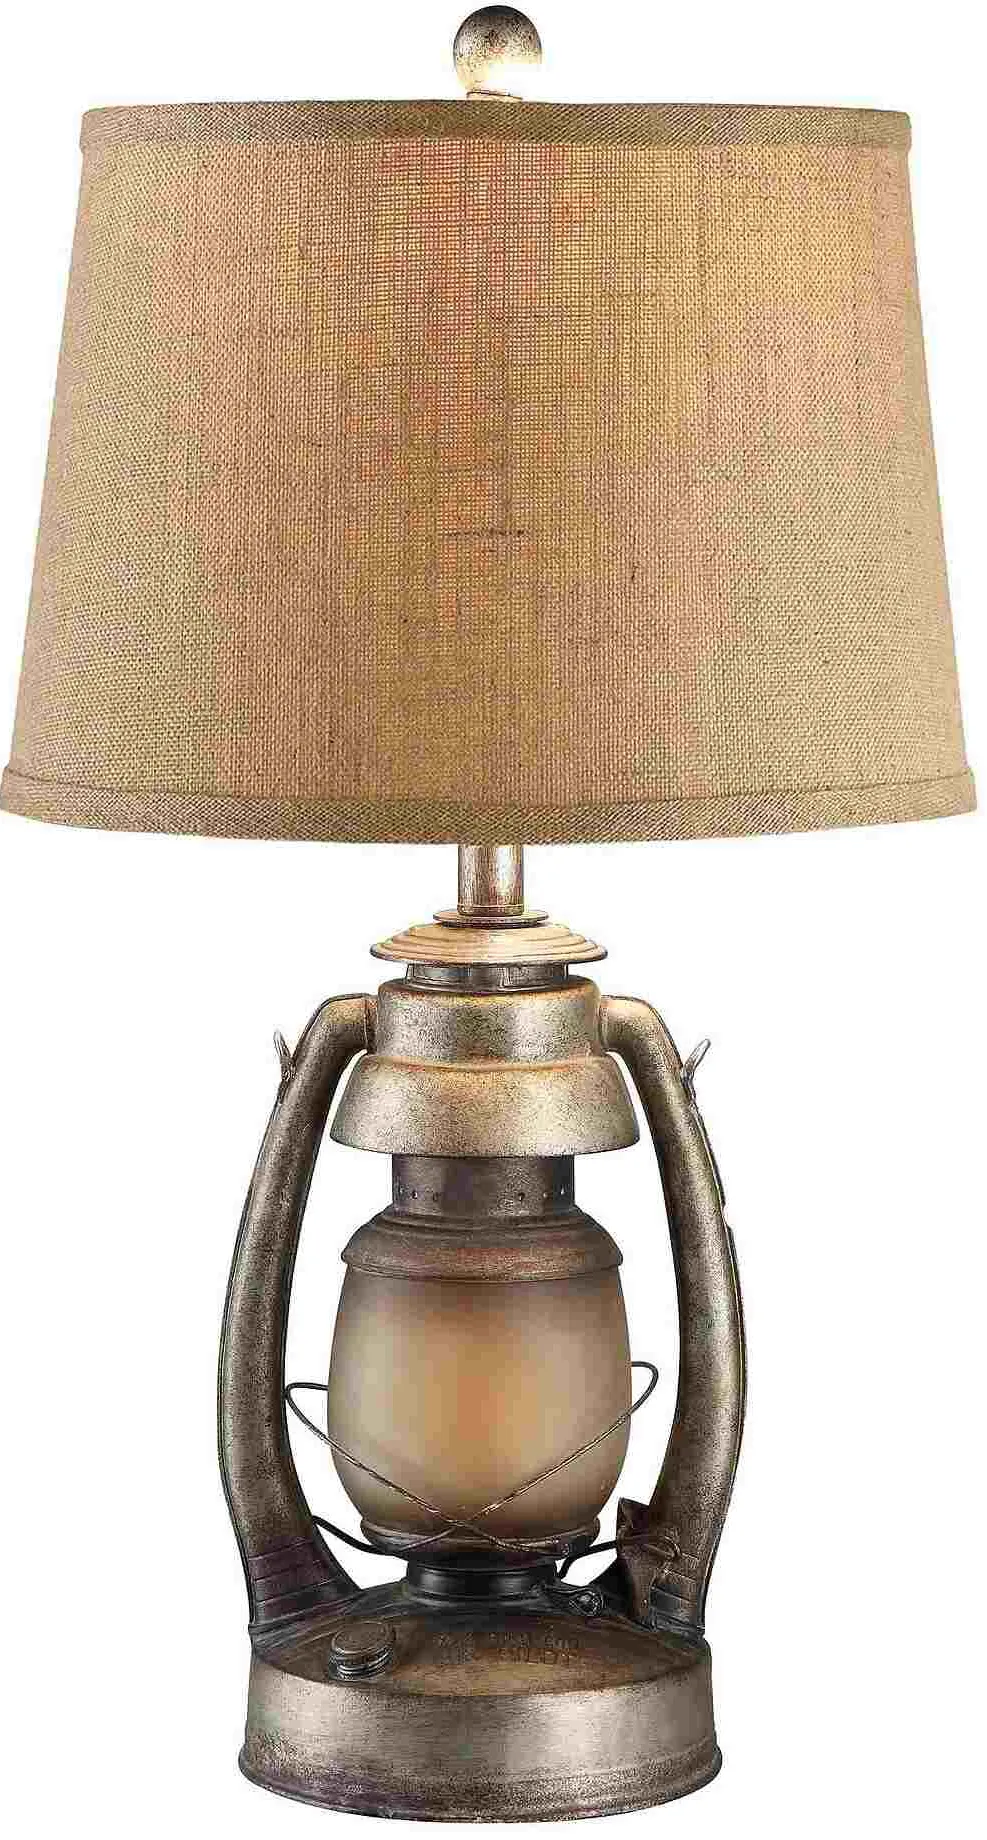 Crestview Collection Oil Lantern Antique Silver Table lamp